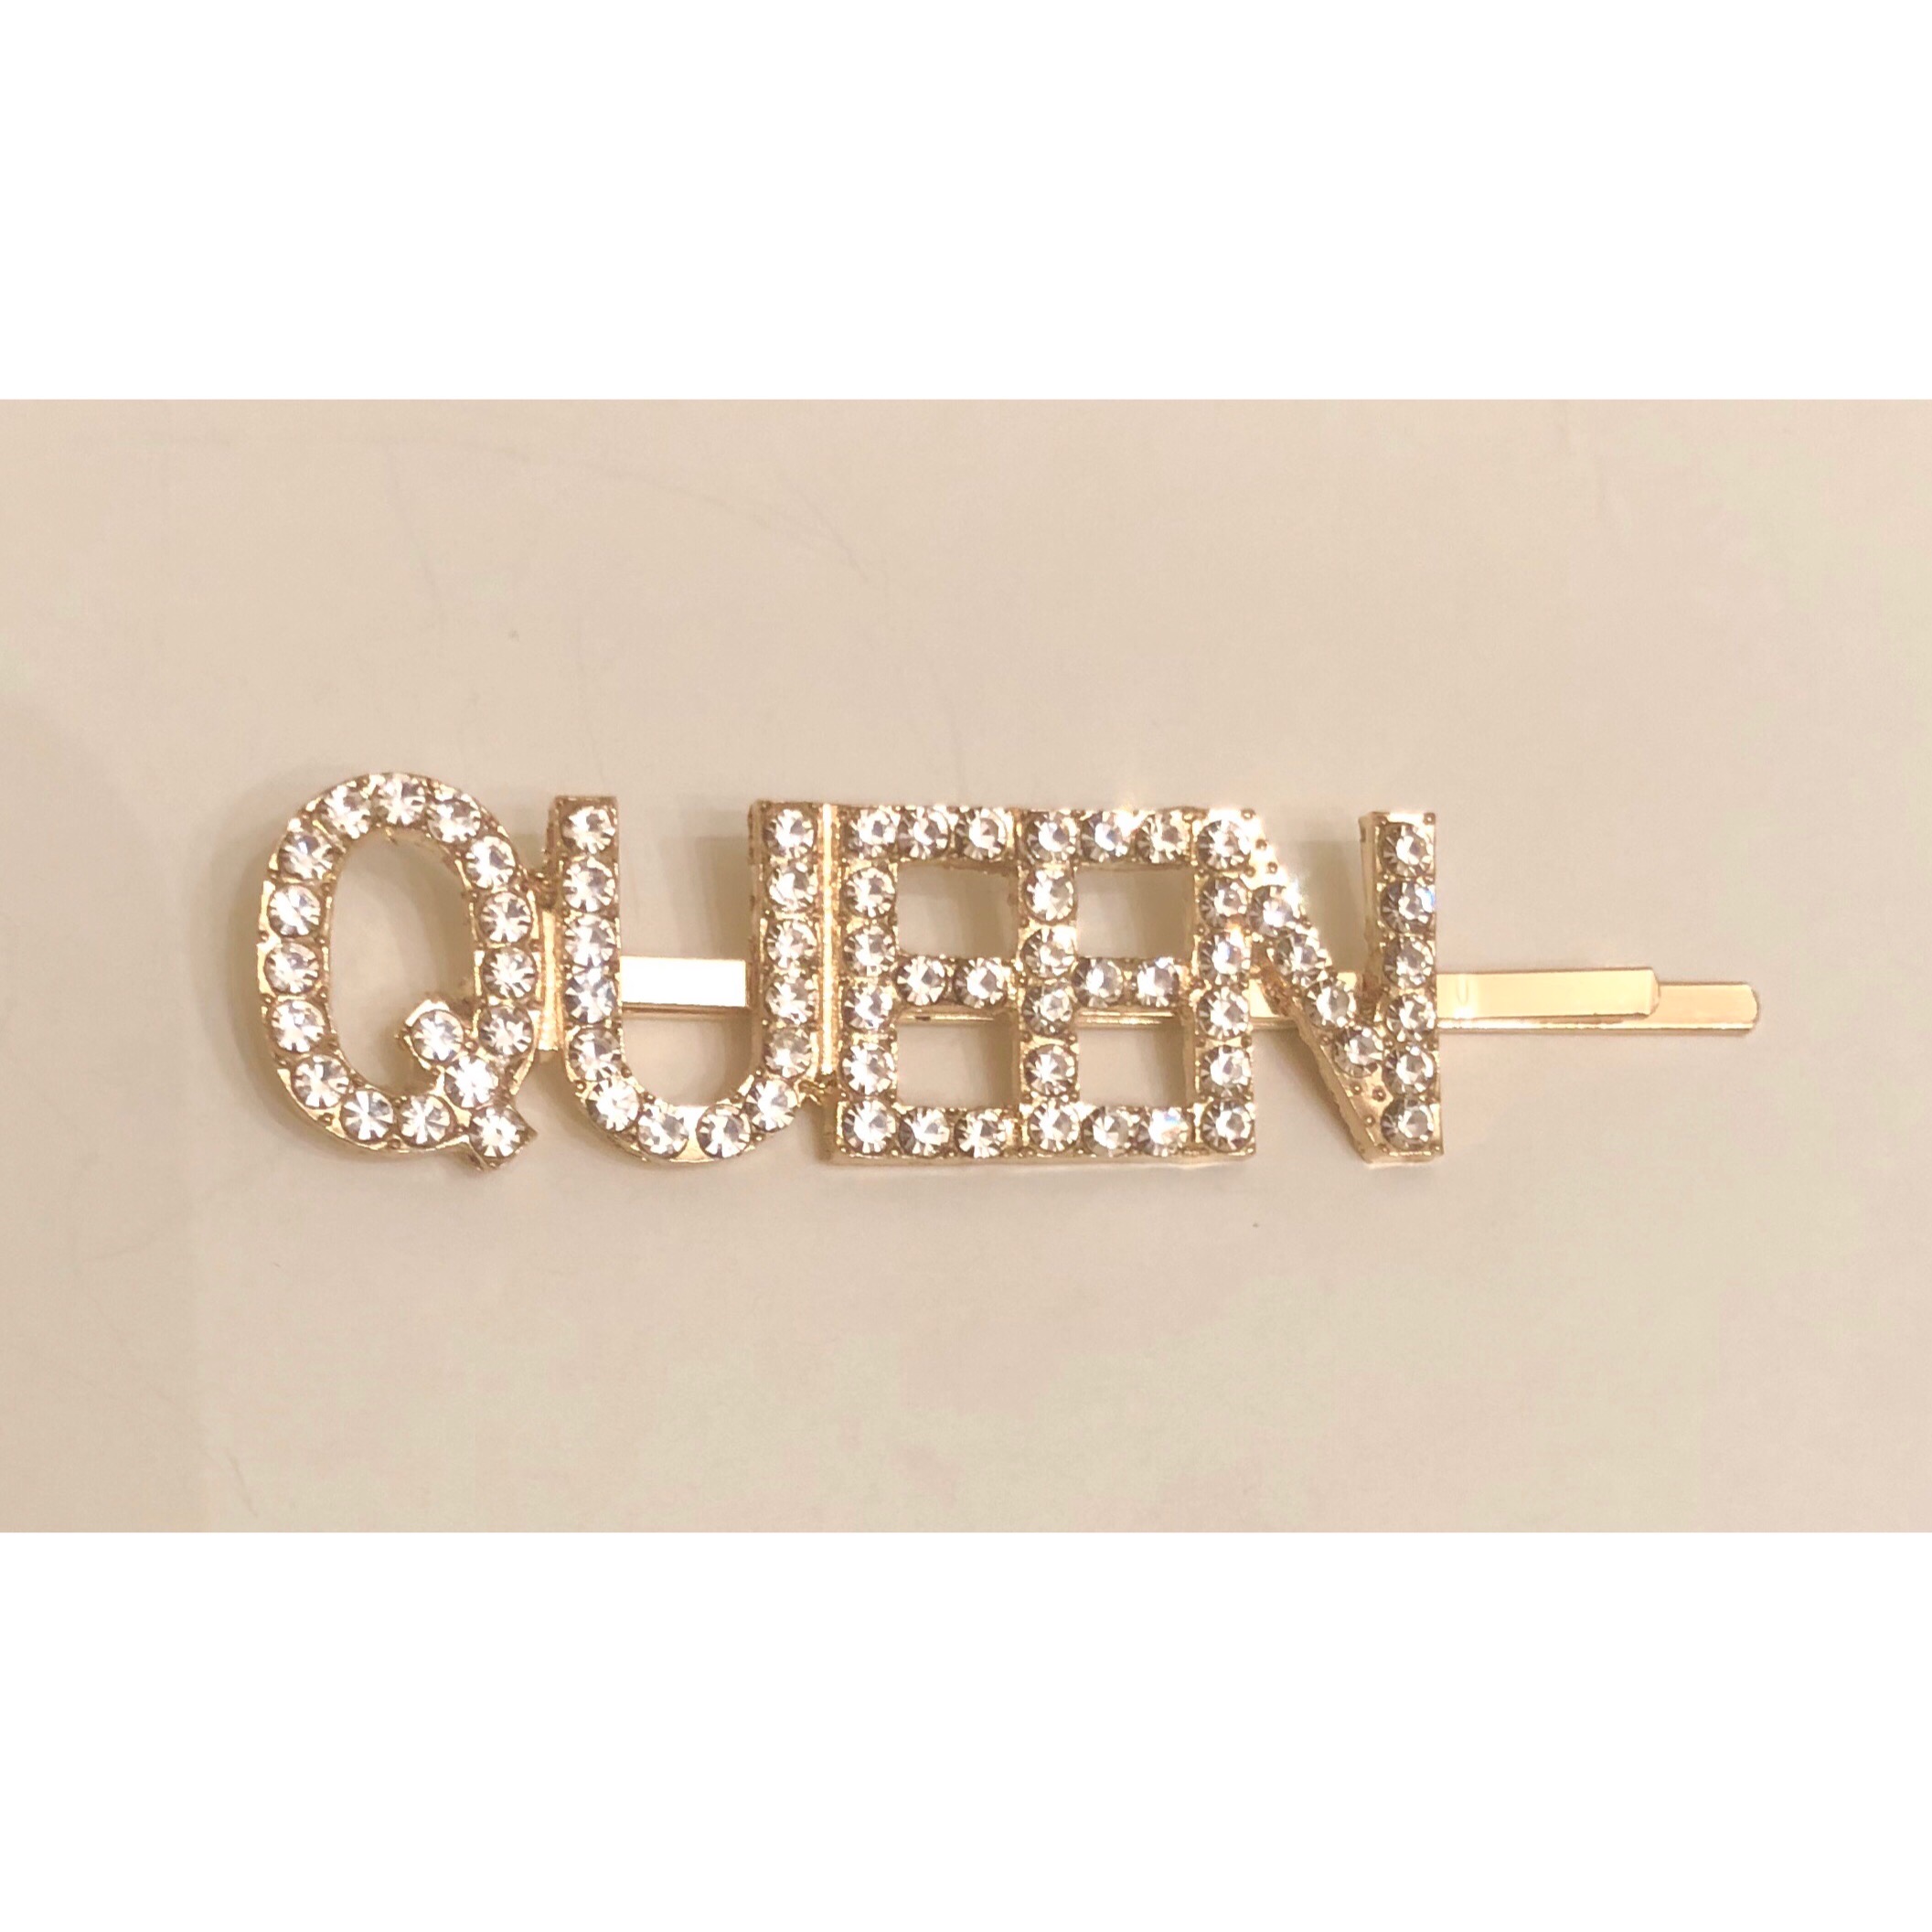 Queen Bazzle Clips ( Large) - KharmYourRoots